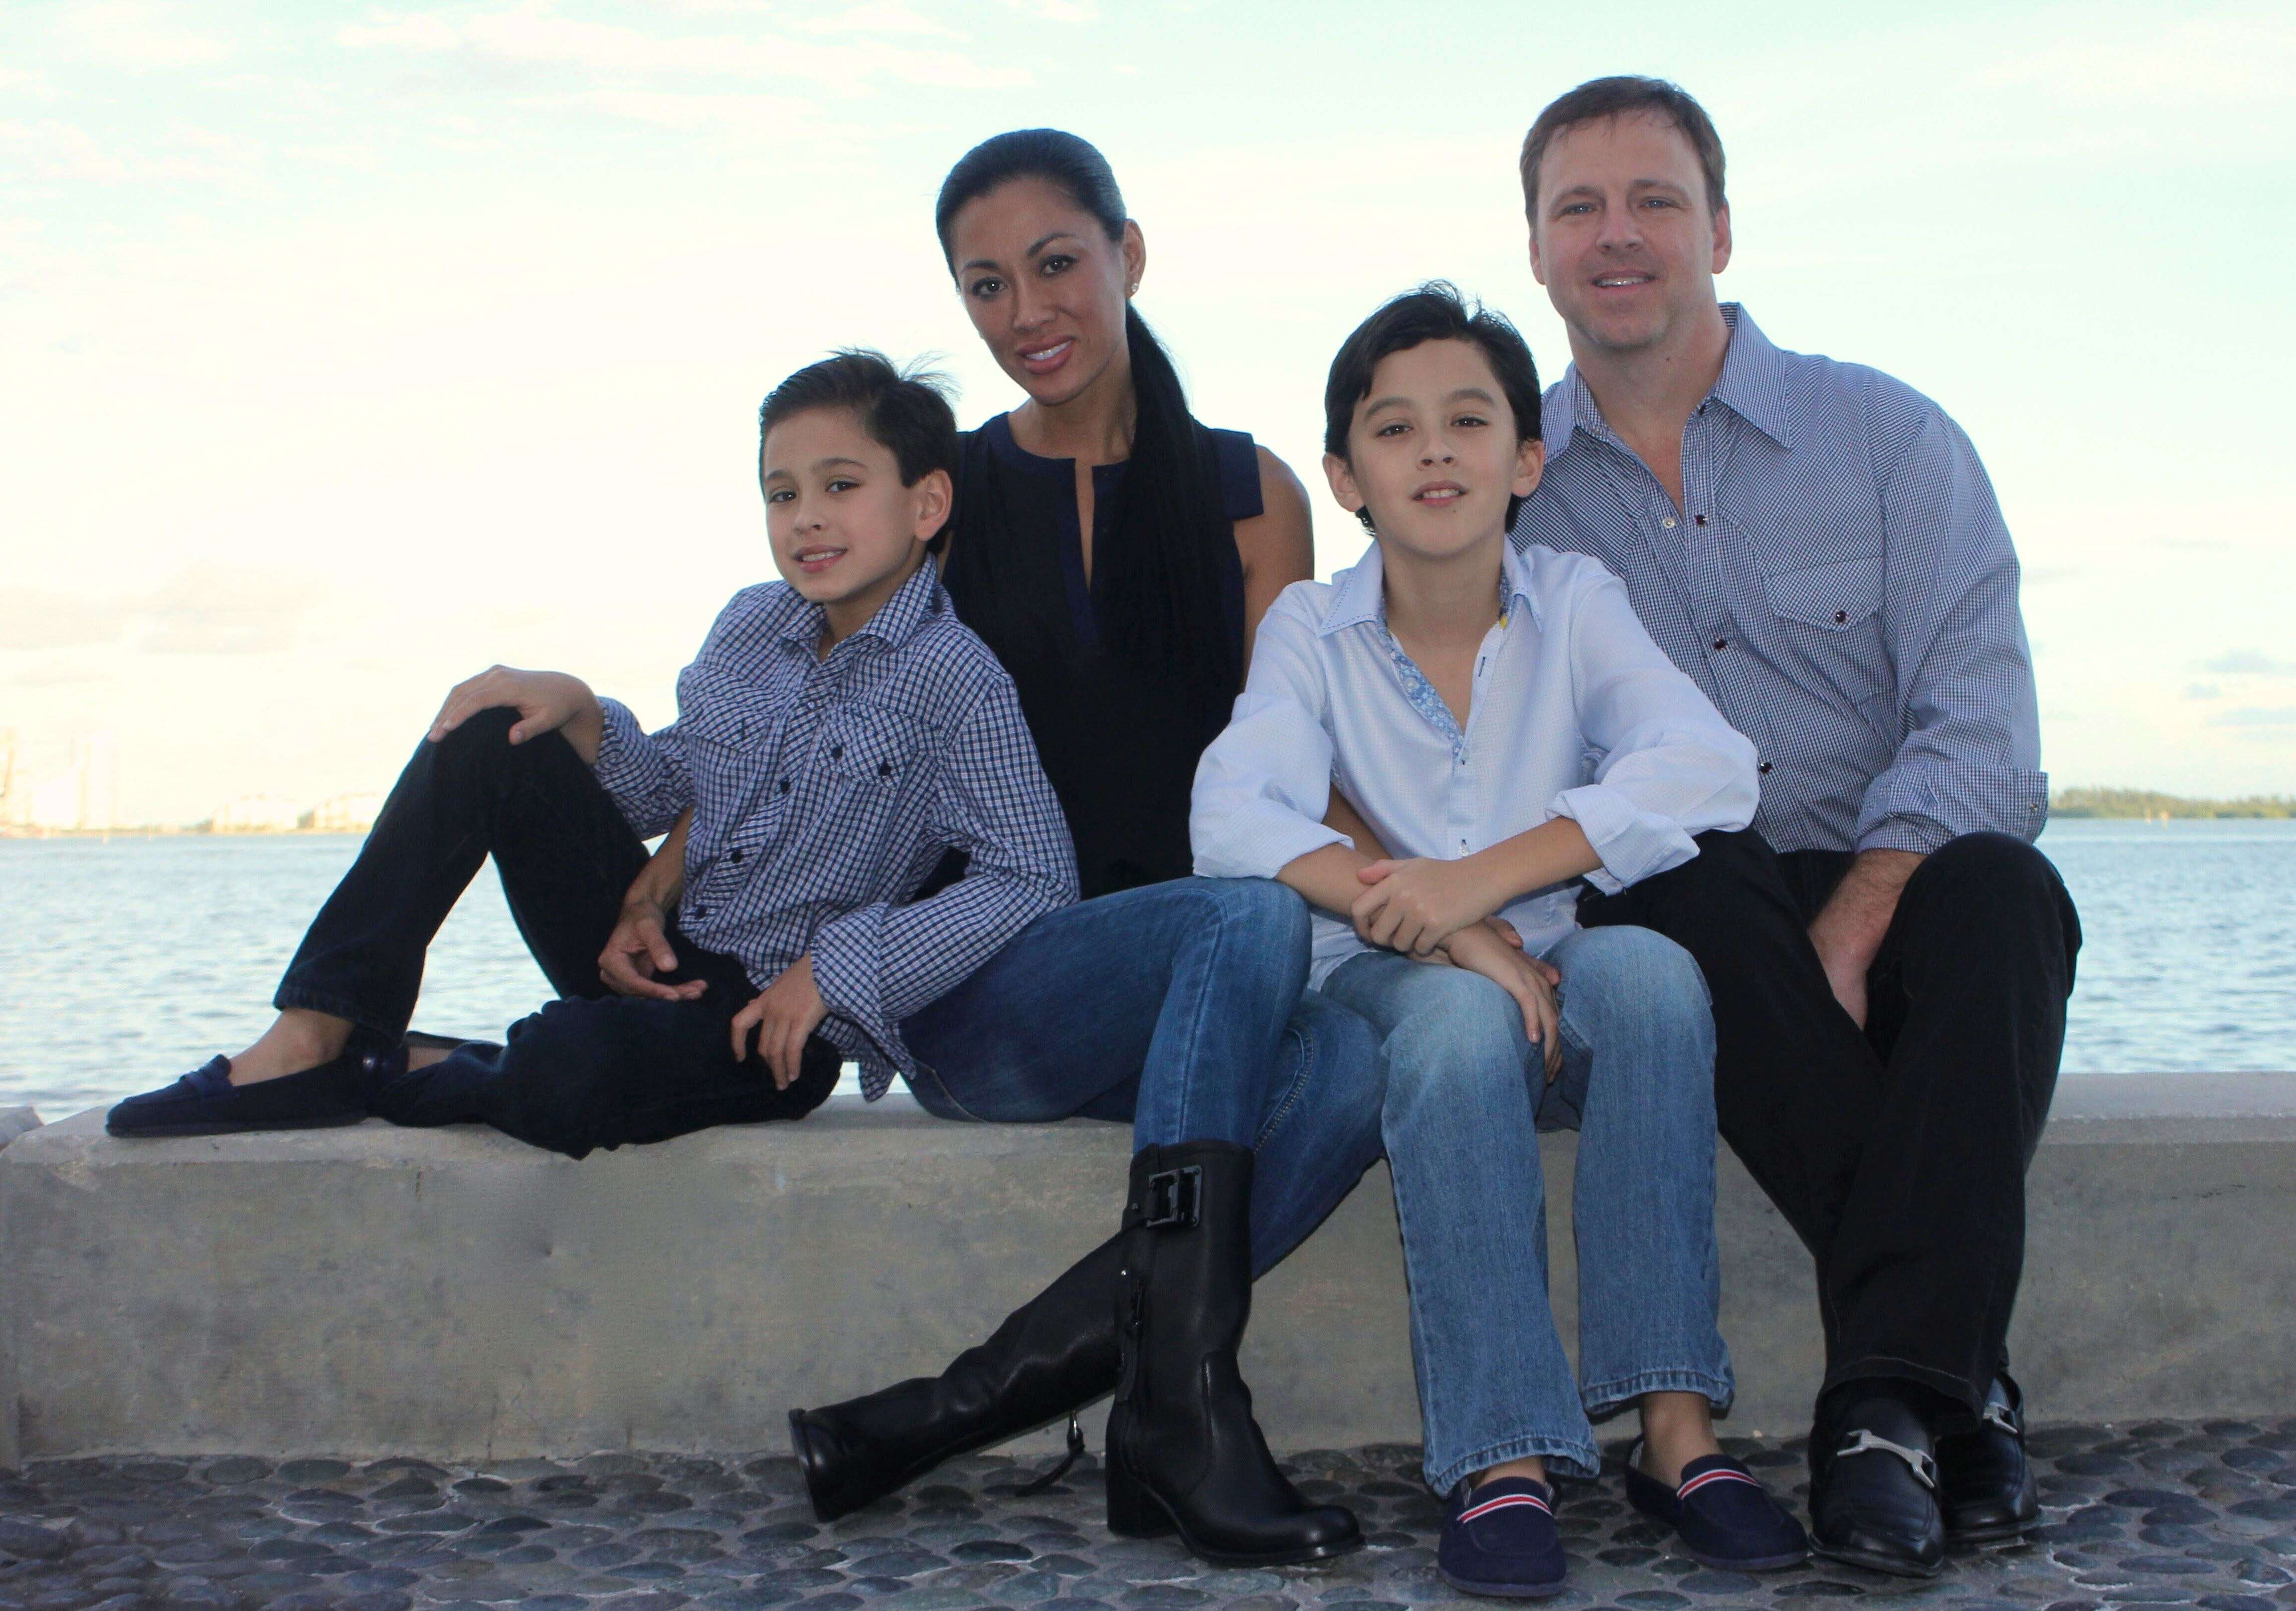 Anna, Phillip and their sons, Phillip Jr. and Aston.